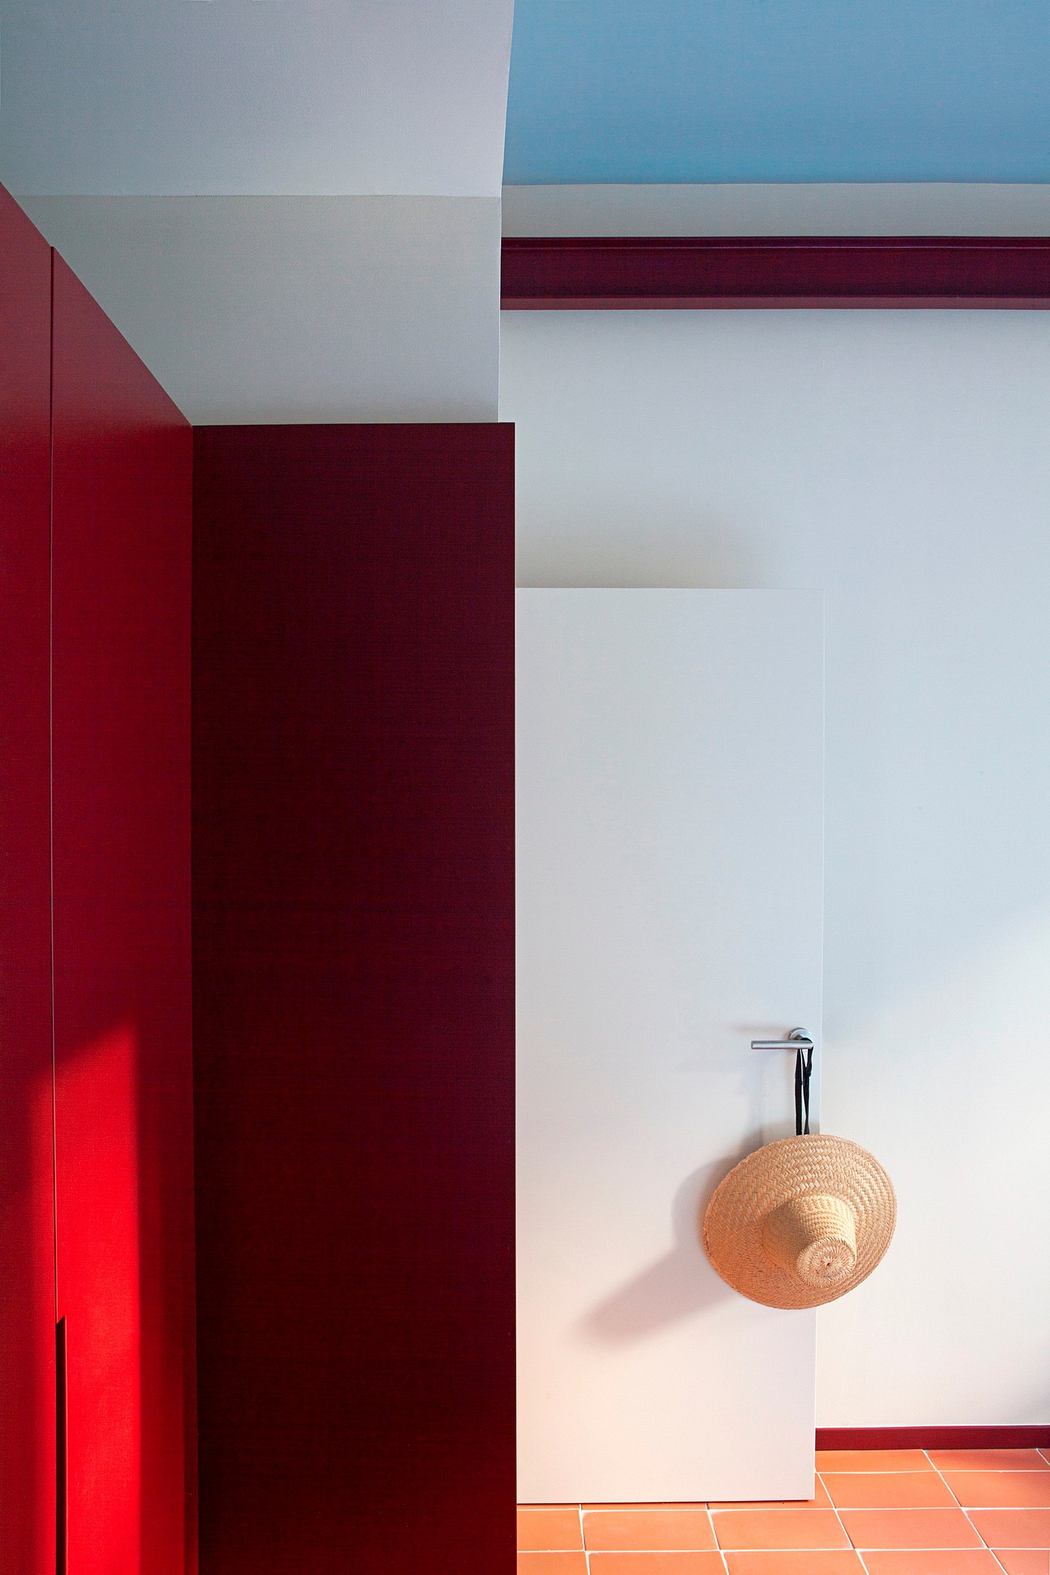 Minimalist interior with red column, white walls, blue trim, and a hanging